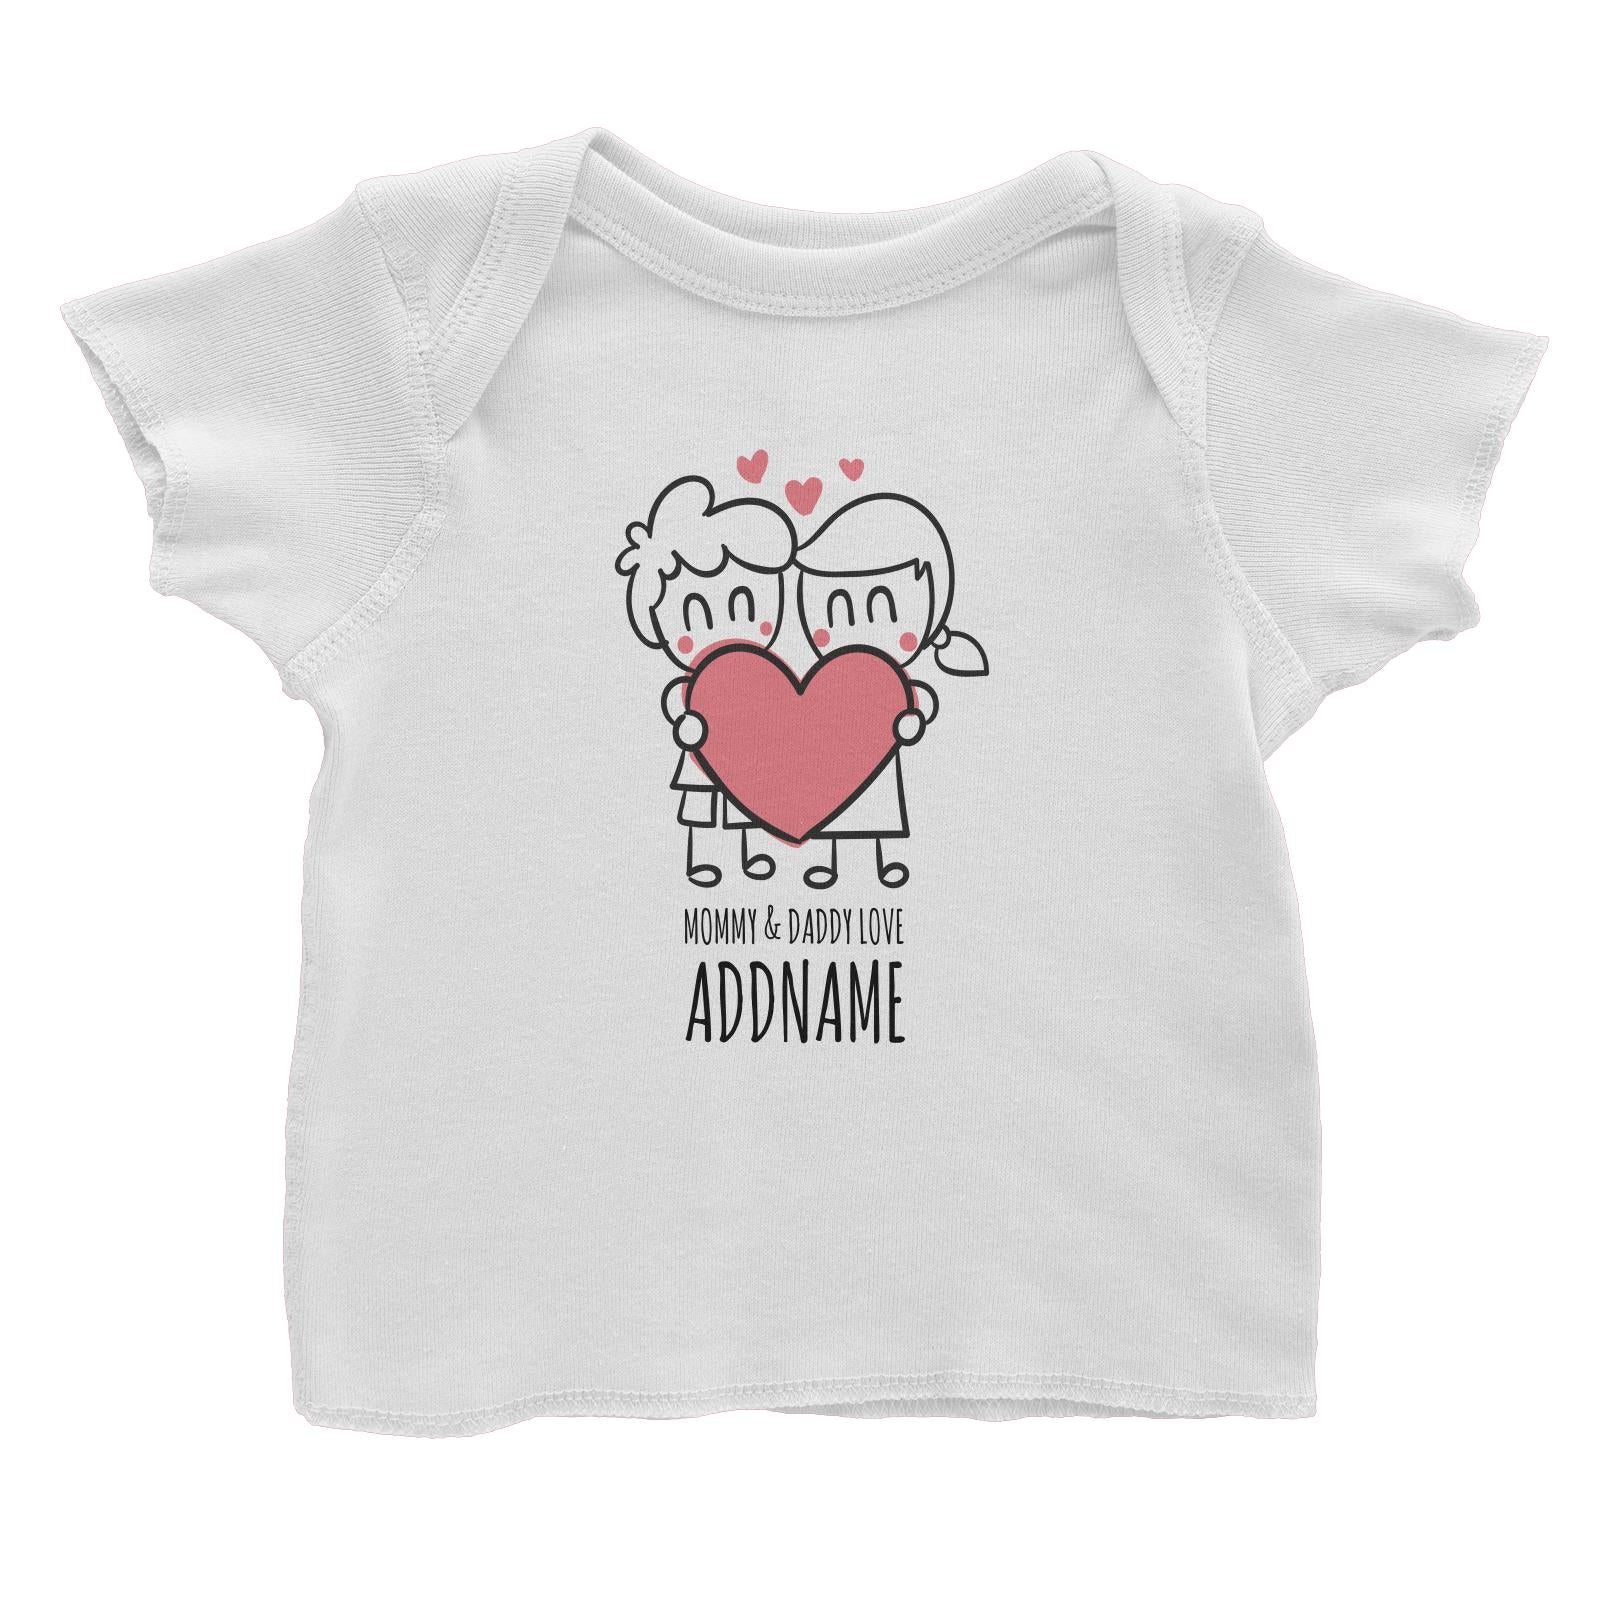 Cartoon Doodle Mommy & Daddy Love White White Baby T-Shirt